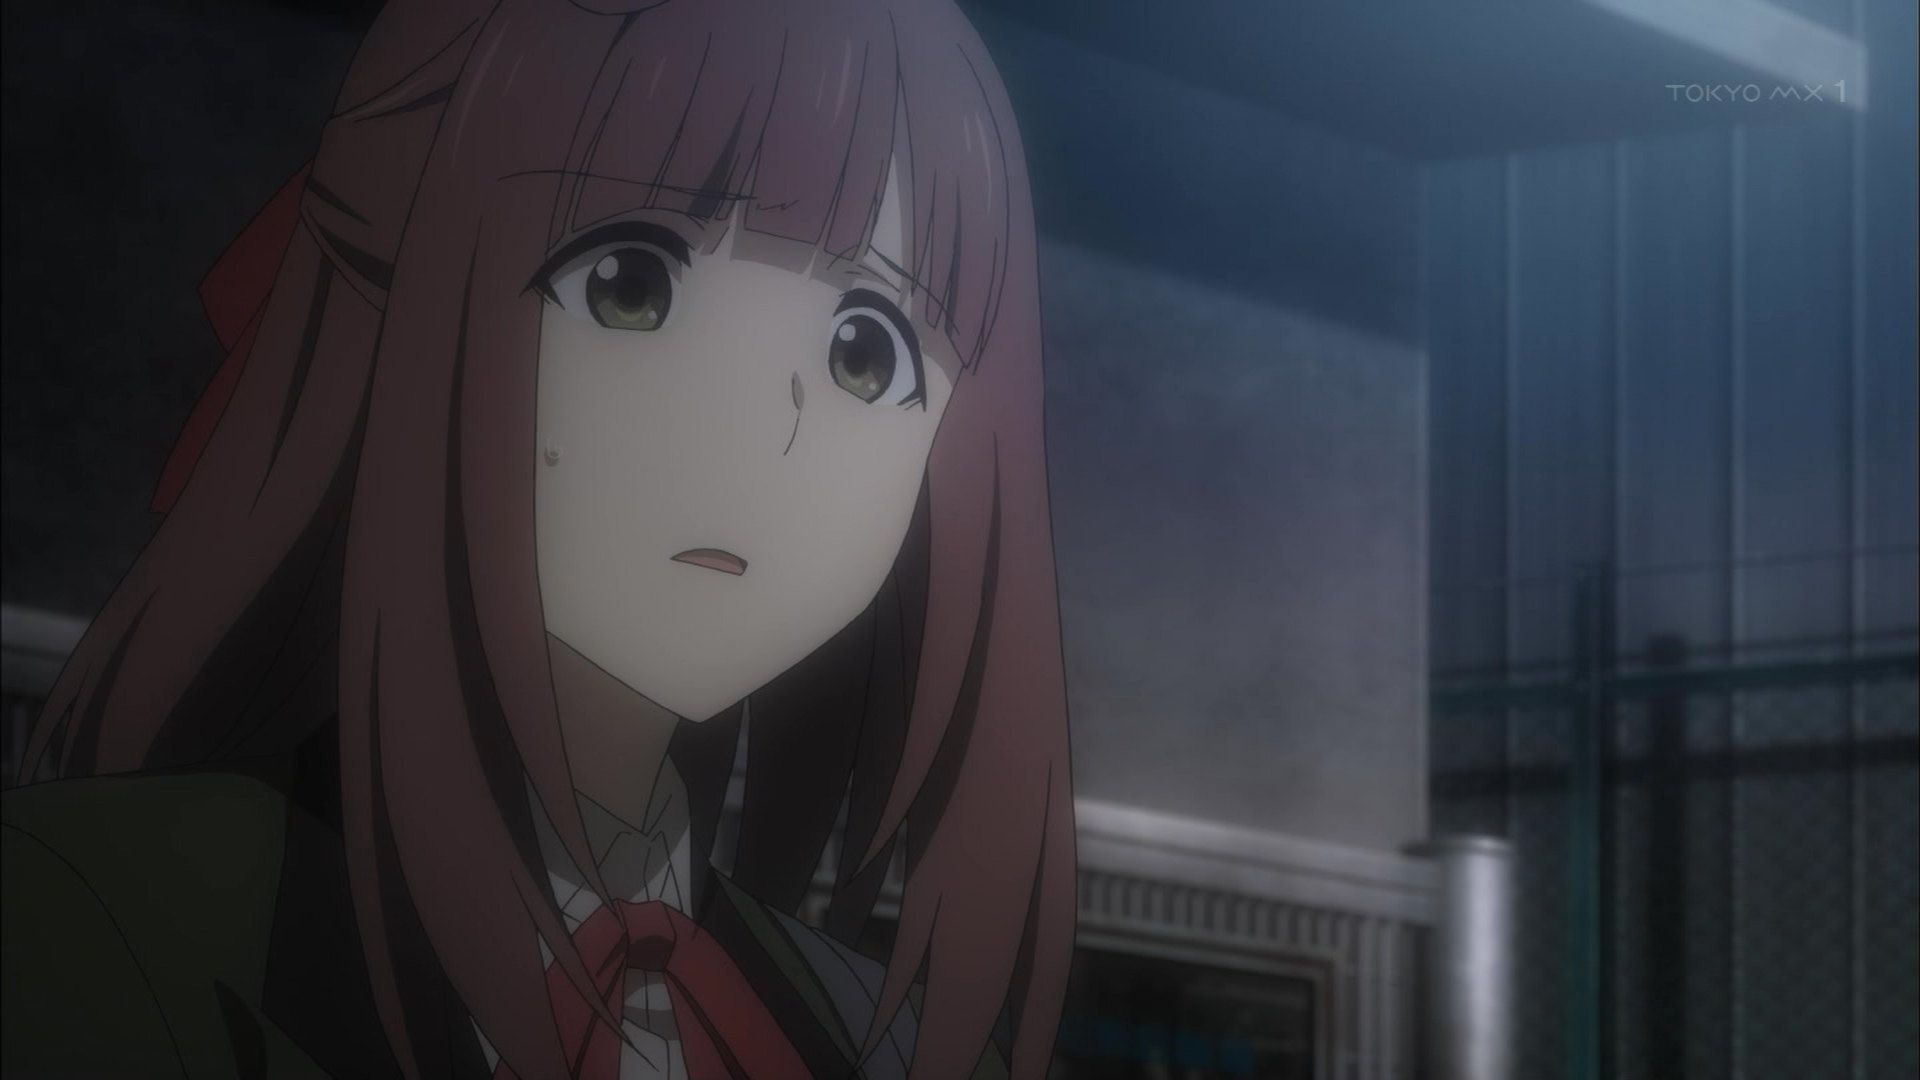 Lostorage incited WIXOSS 9 talk, you gonna do if! It's because of the cocoon! Responsible for goodbye come off! 19